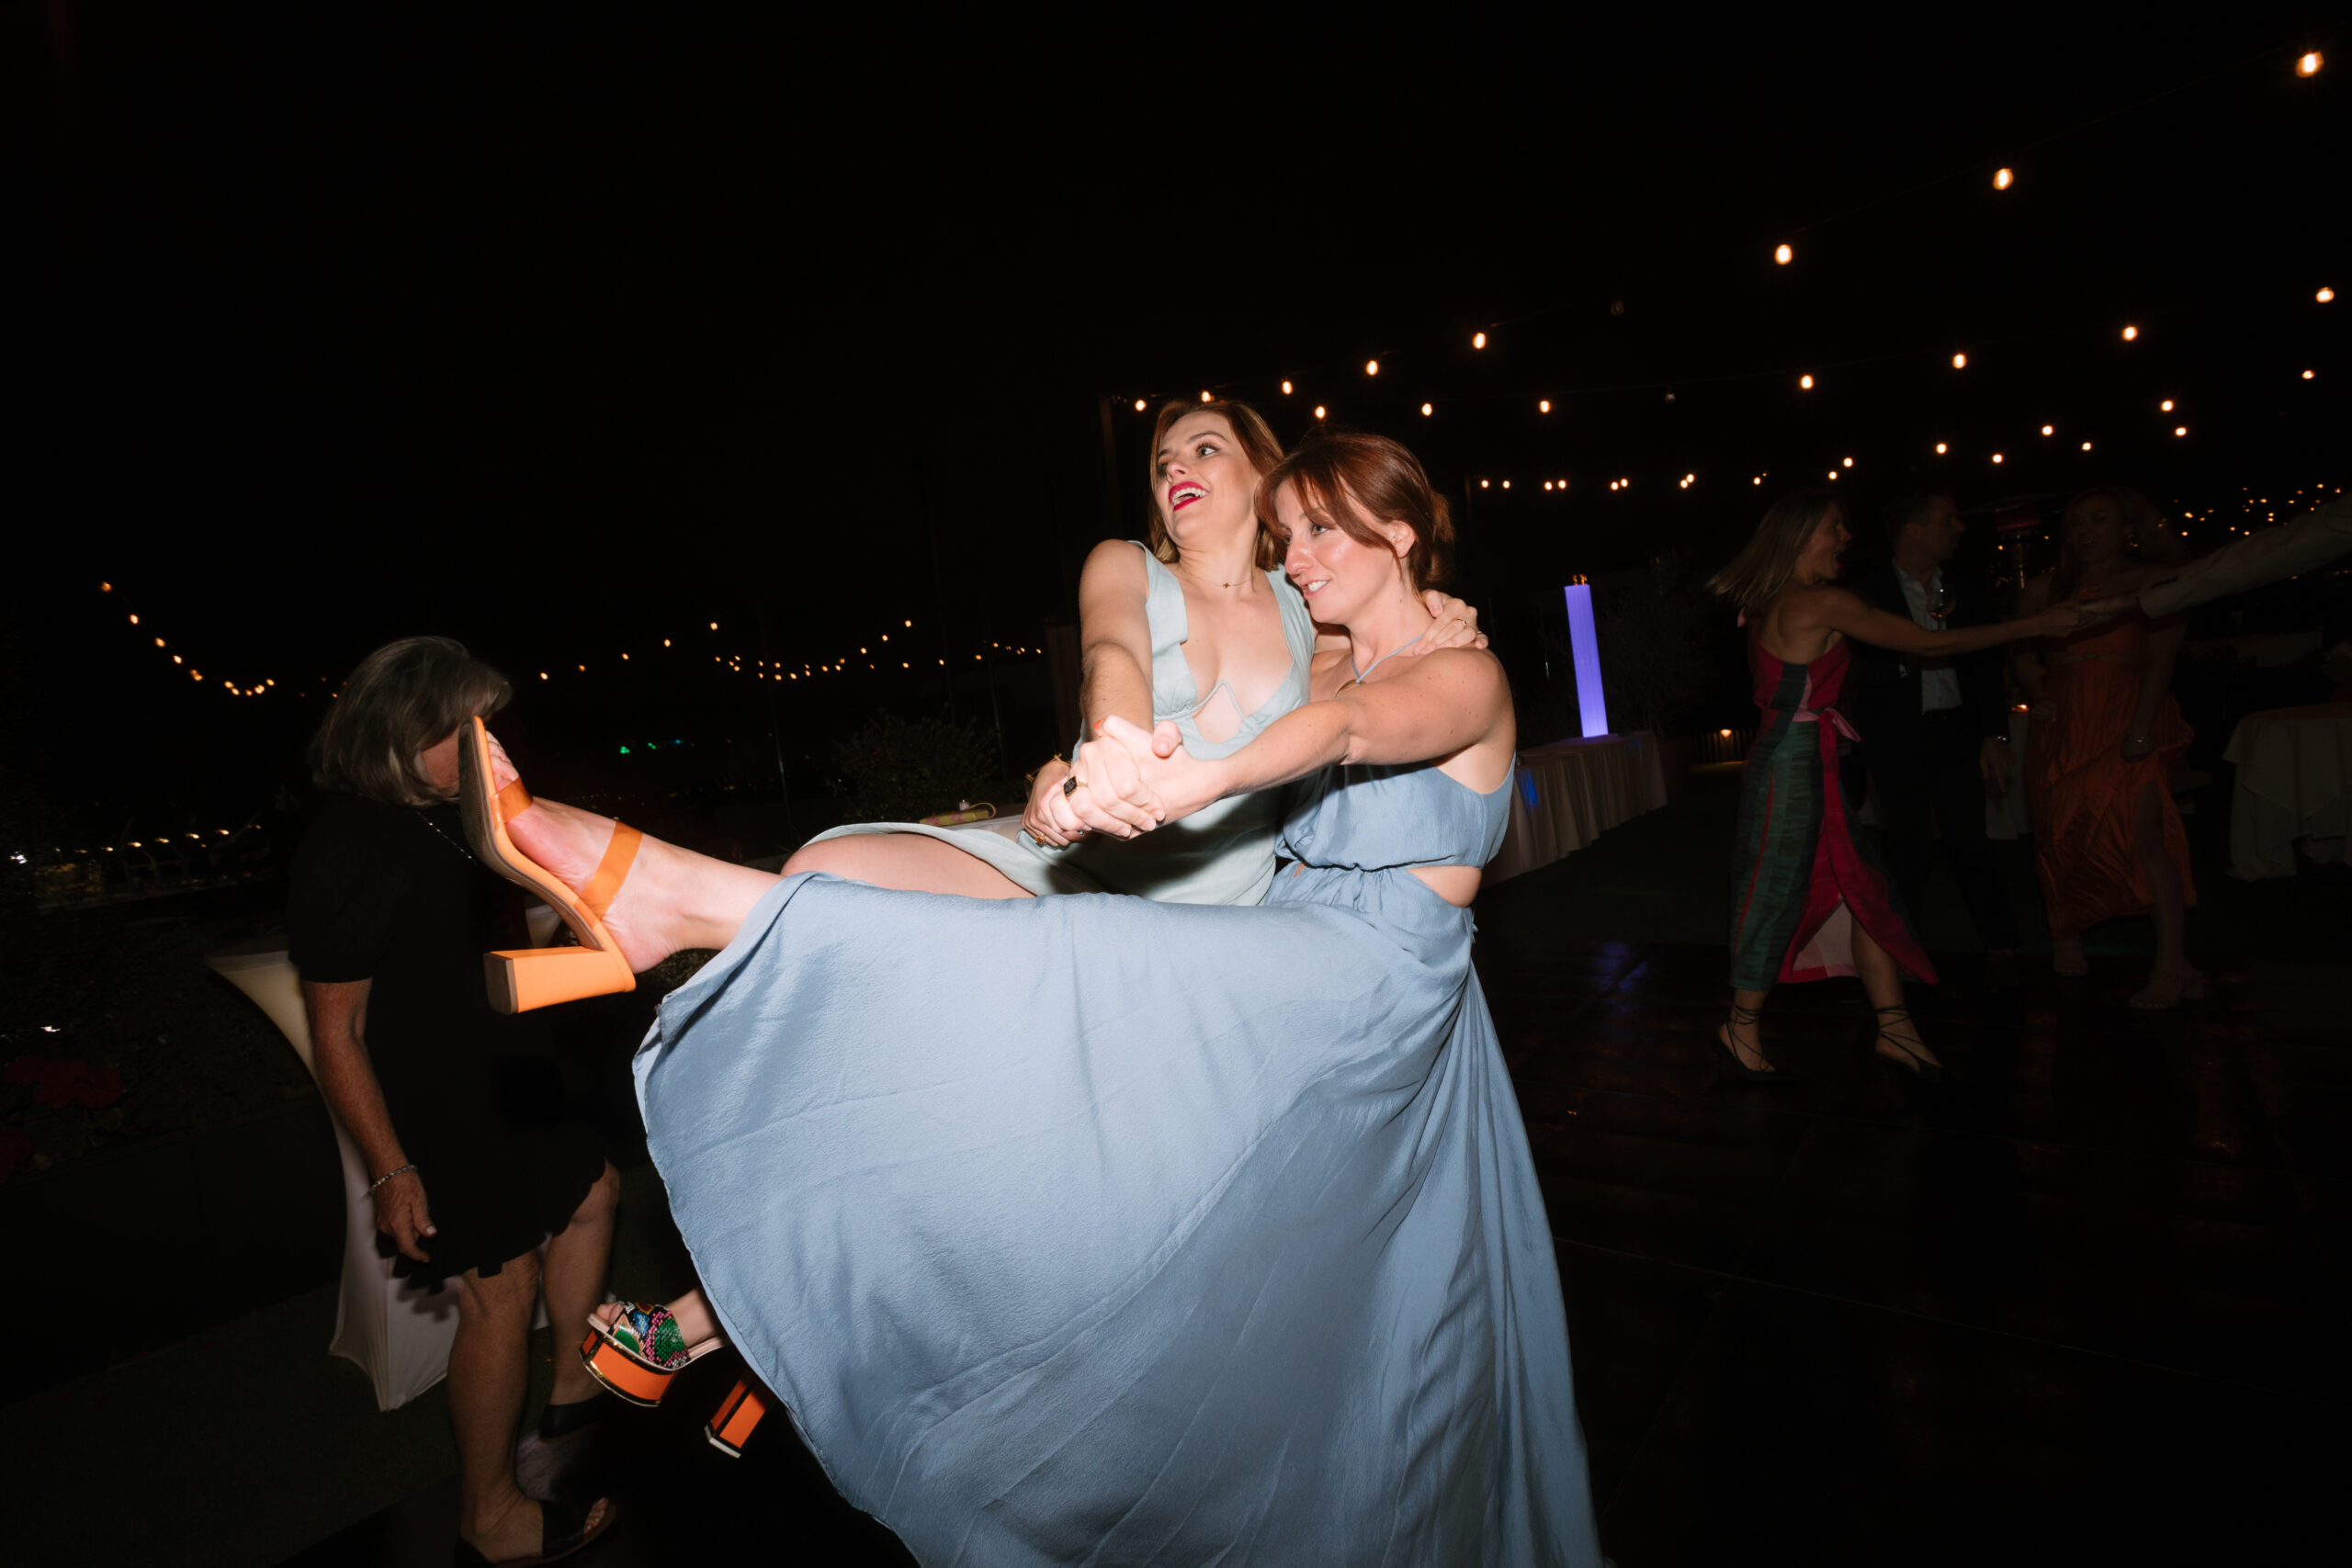 direct flash photo of wedding guests dancing and kicking their heels in the air